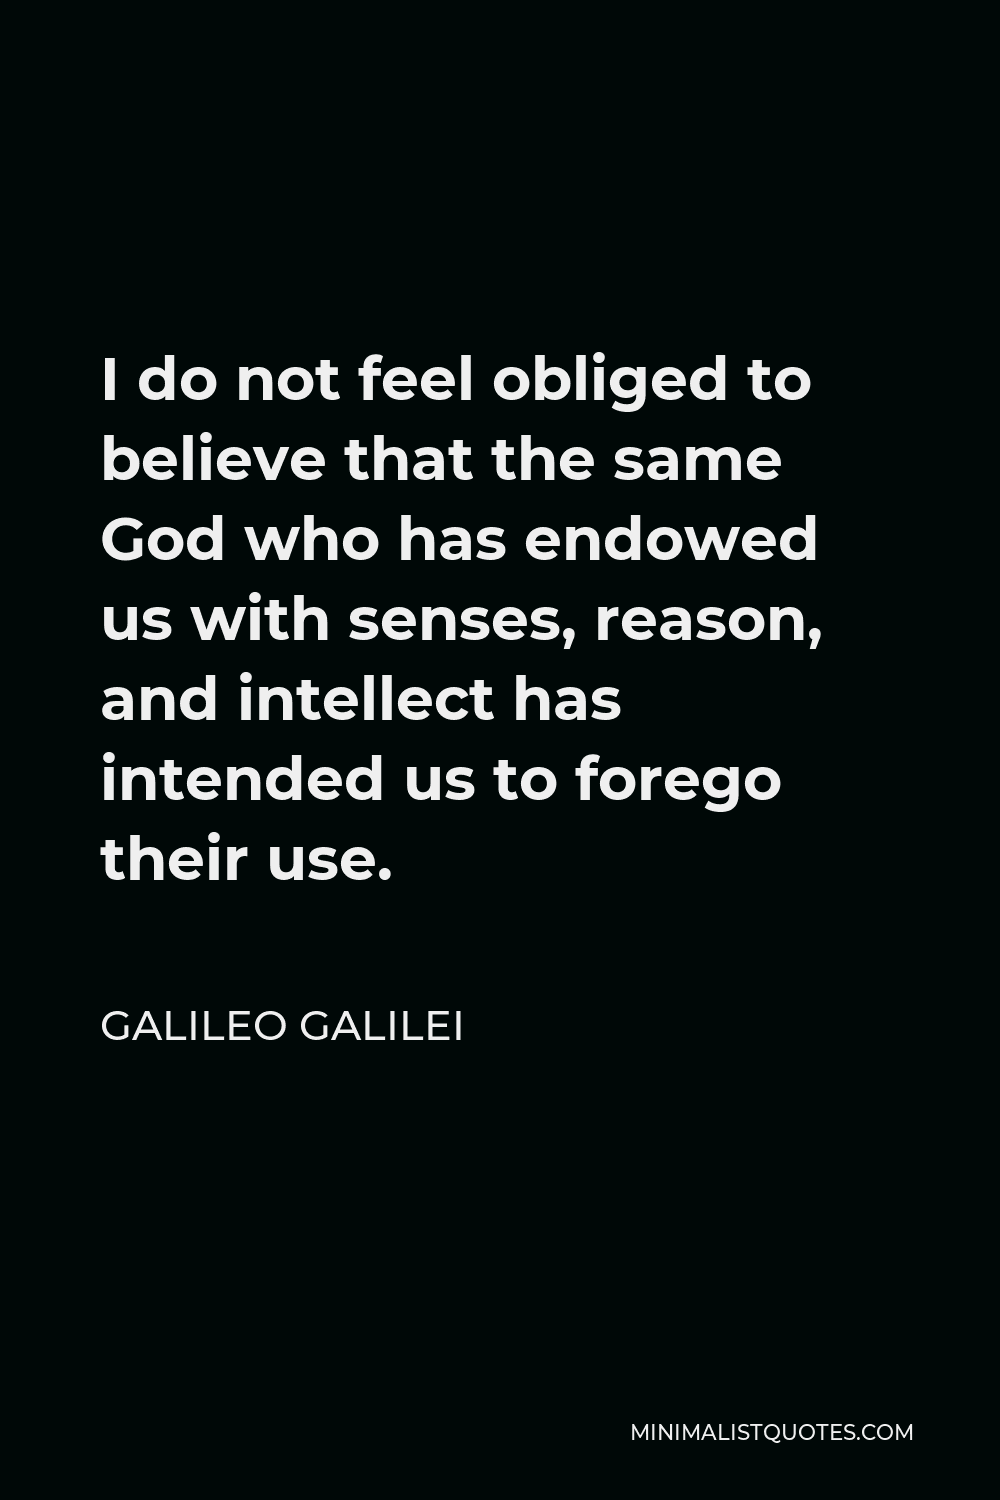 Galileo Galilei Quote I Do Not Feel Obliged To Believe That The Same God Who Has Endowed Us With Senses Reason And Intellect Has Intended Us To Forego Their Use